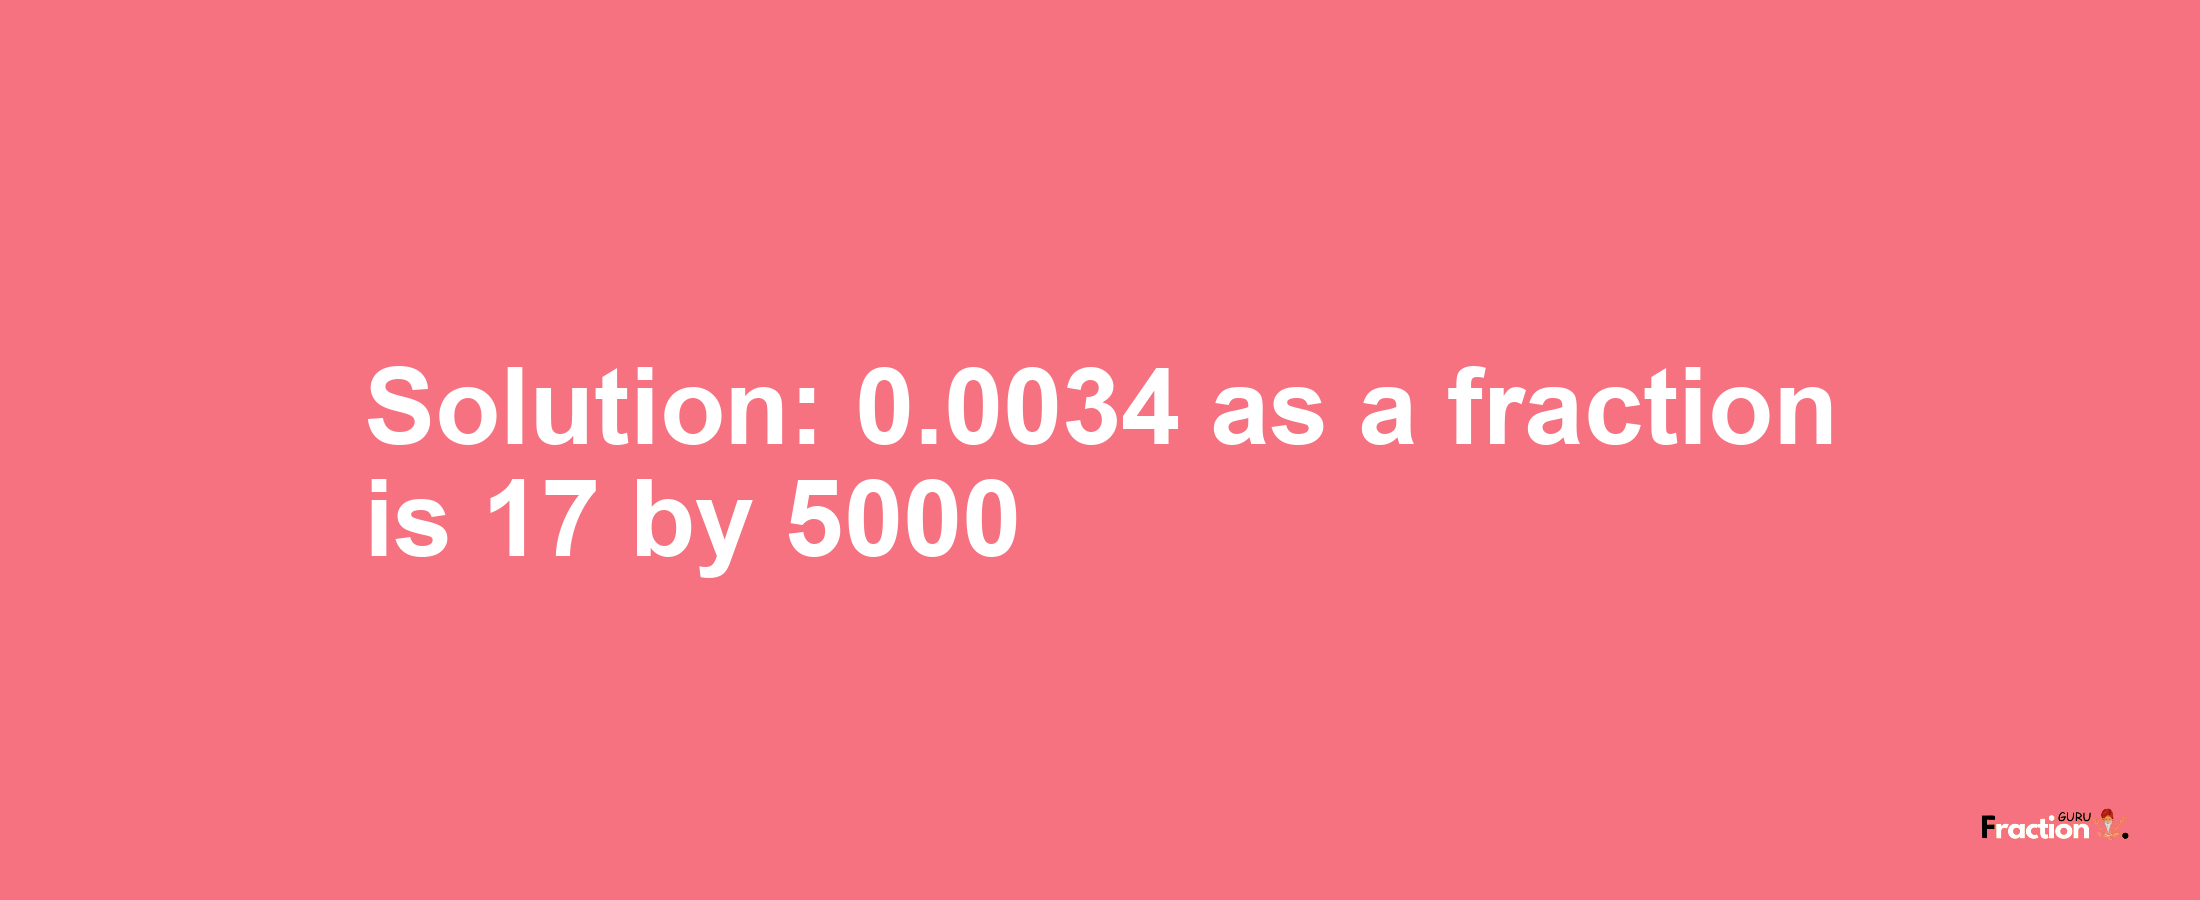 Solution:0.0034 as a fraction is 17/5000